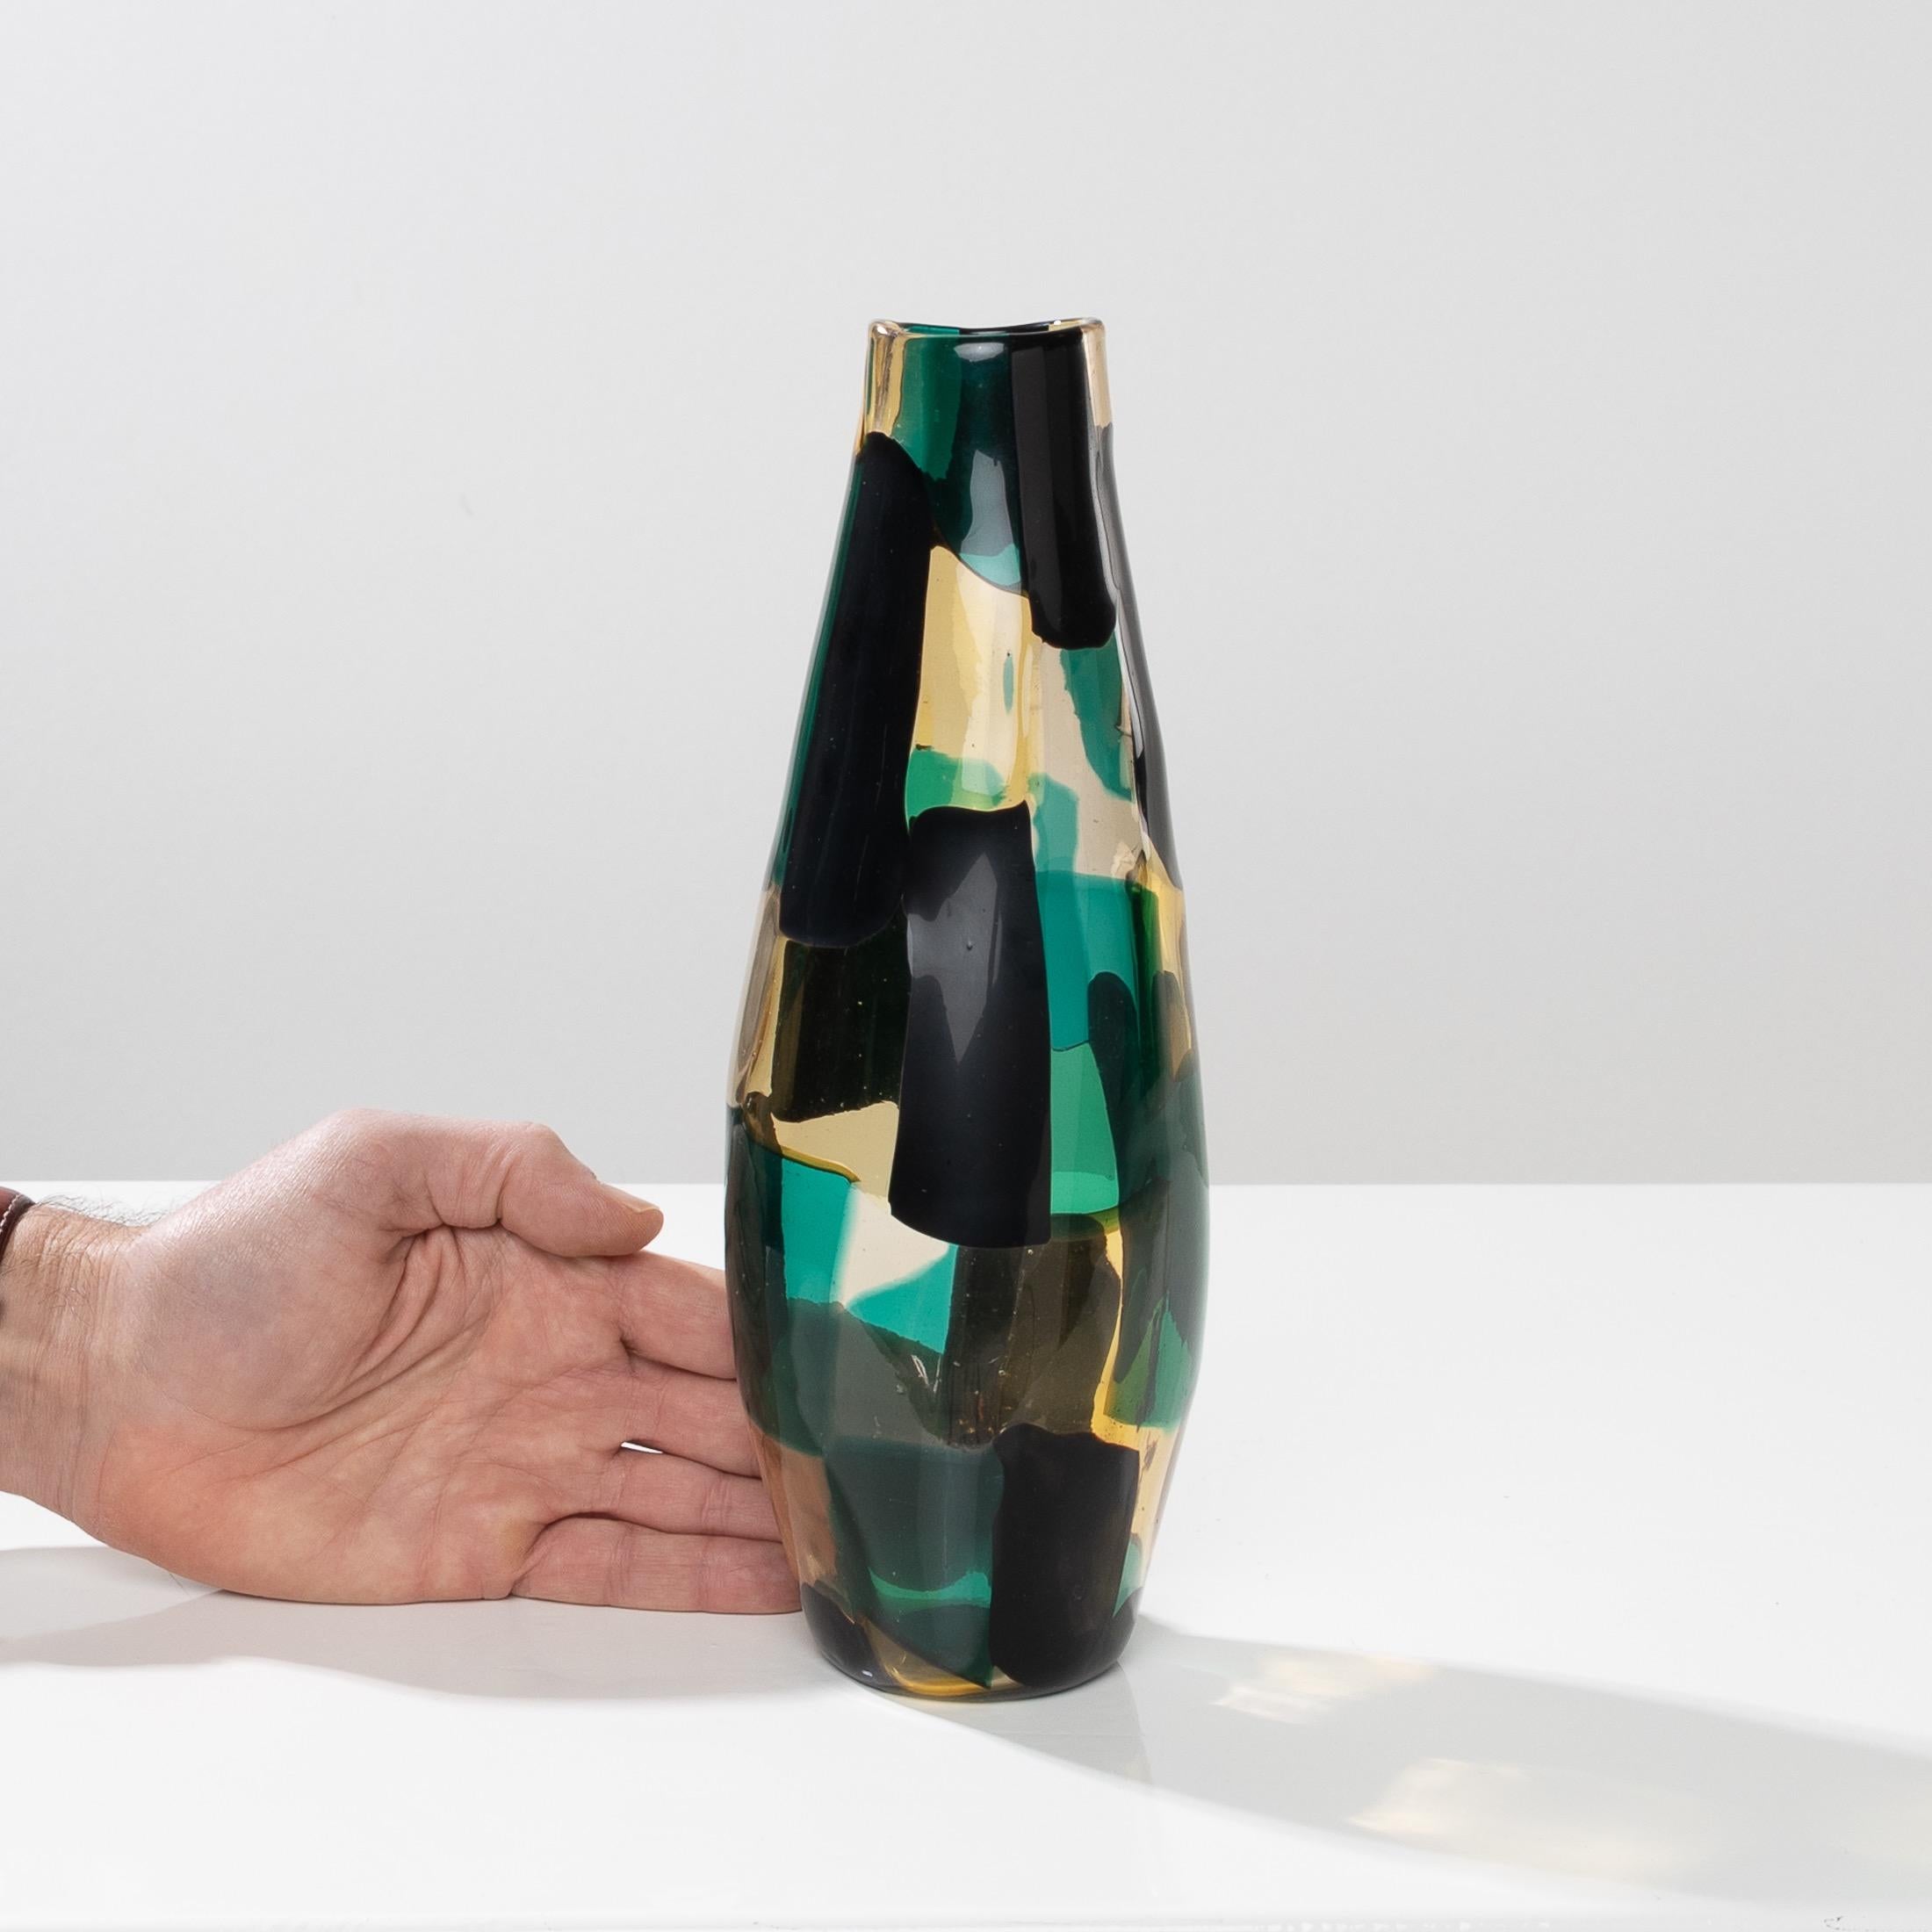 Italian Vase from the “Pezzato” Series 'Referenced under Number 4393' by Fulvio Bianconi